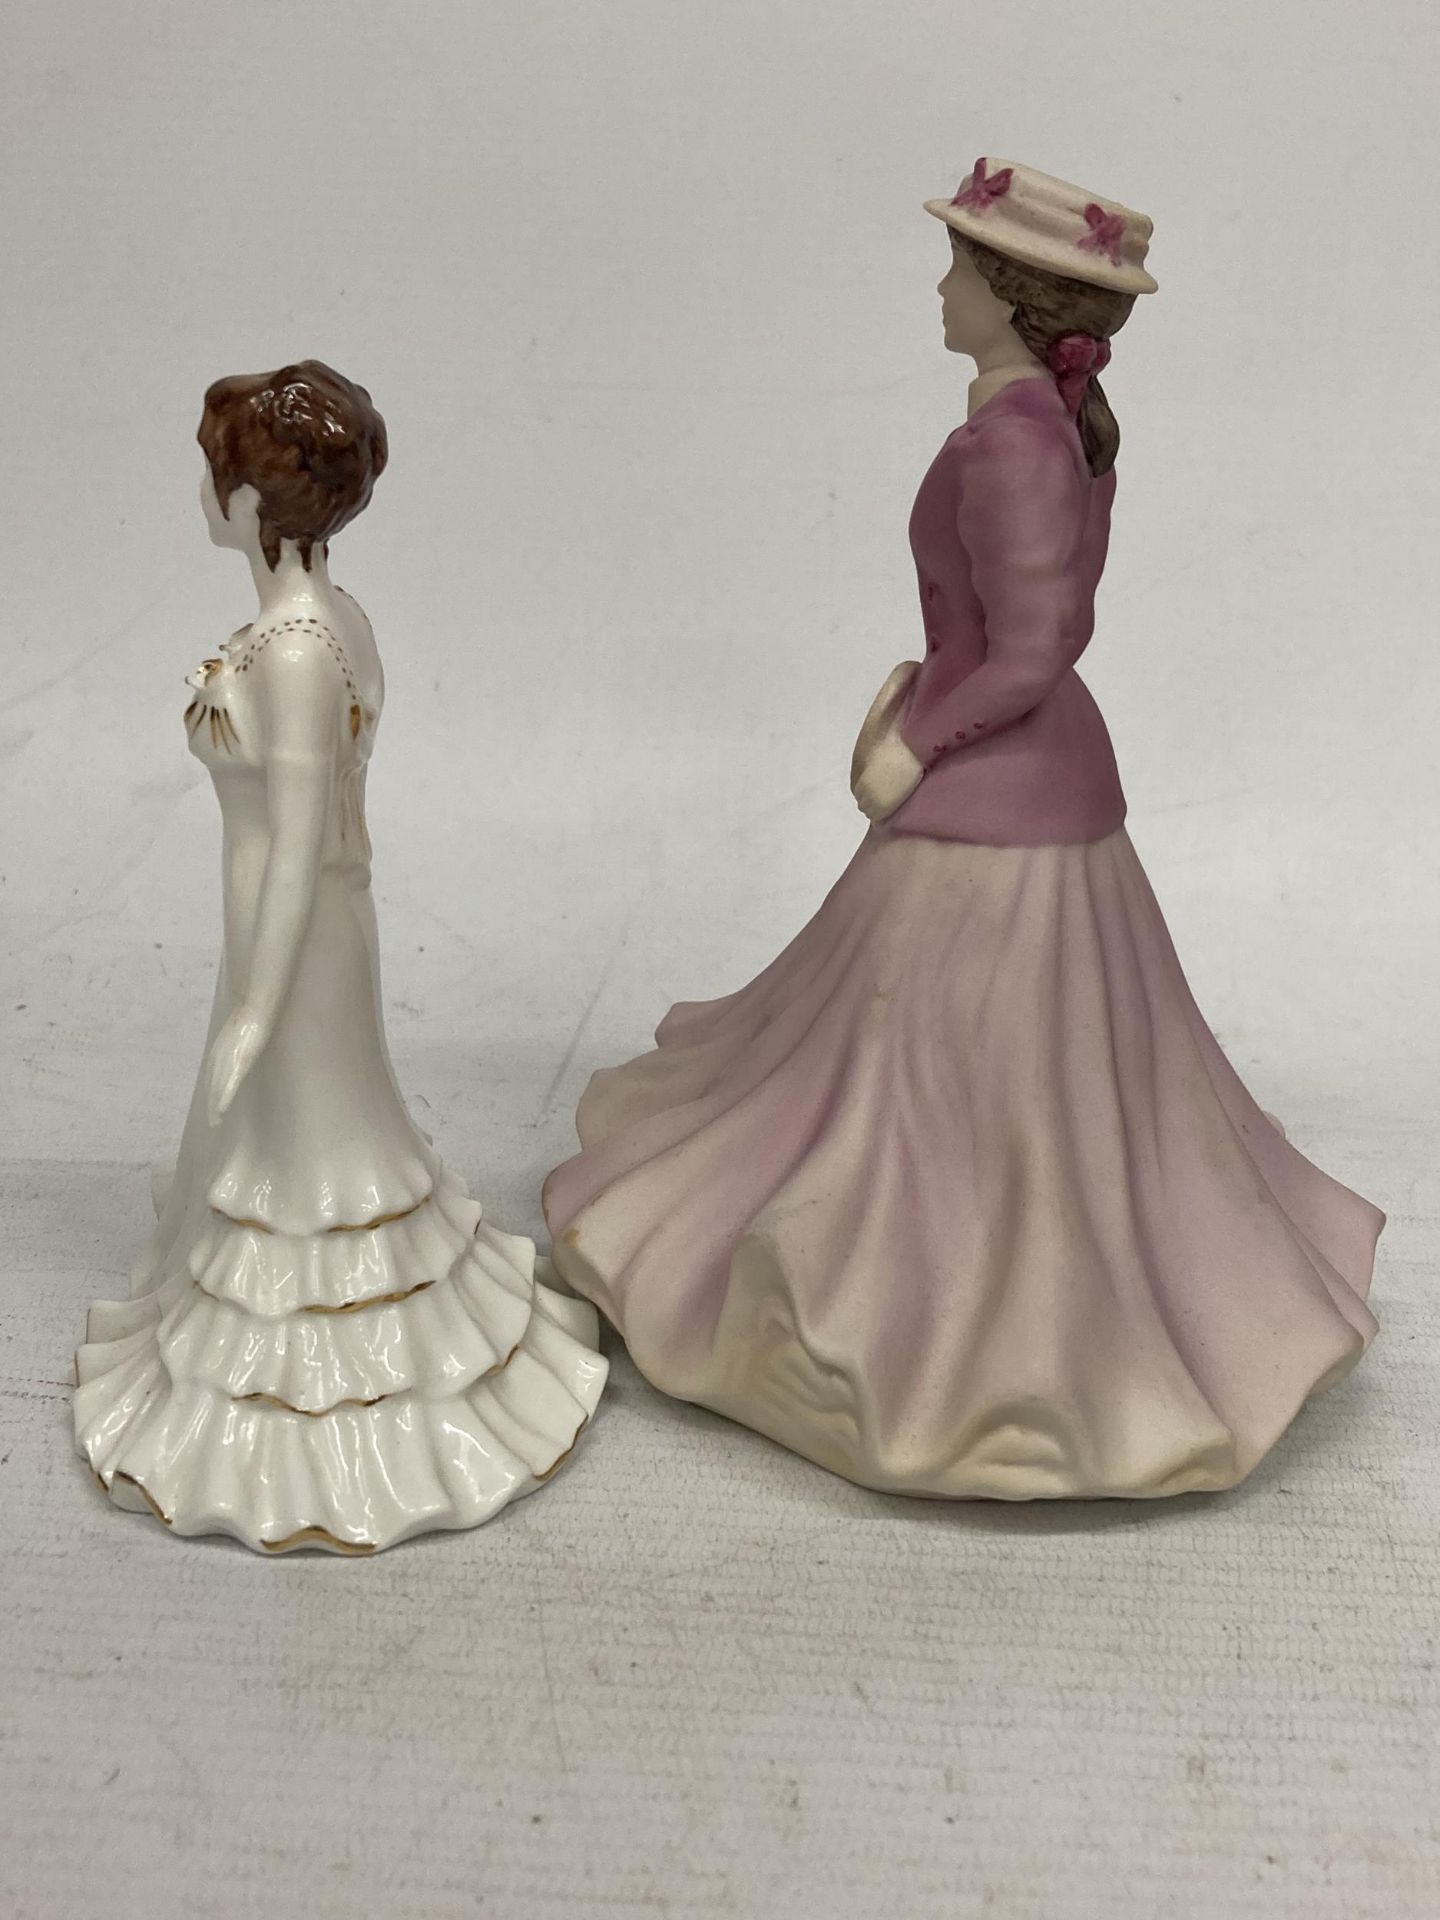 TWO COALPORT FIGURINES "CRYSTAL" AND "BEAU MONDE ON COURT" - Image 3 of 4